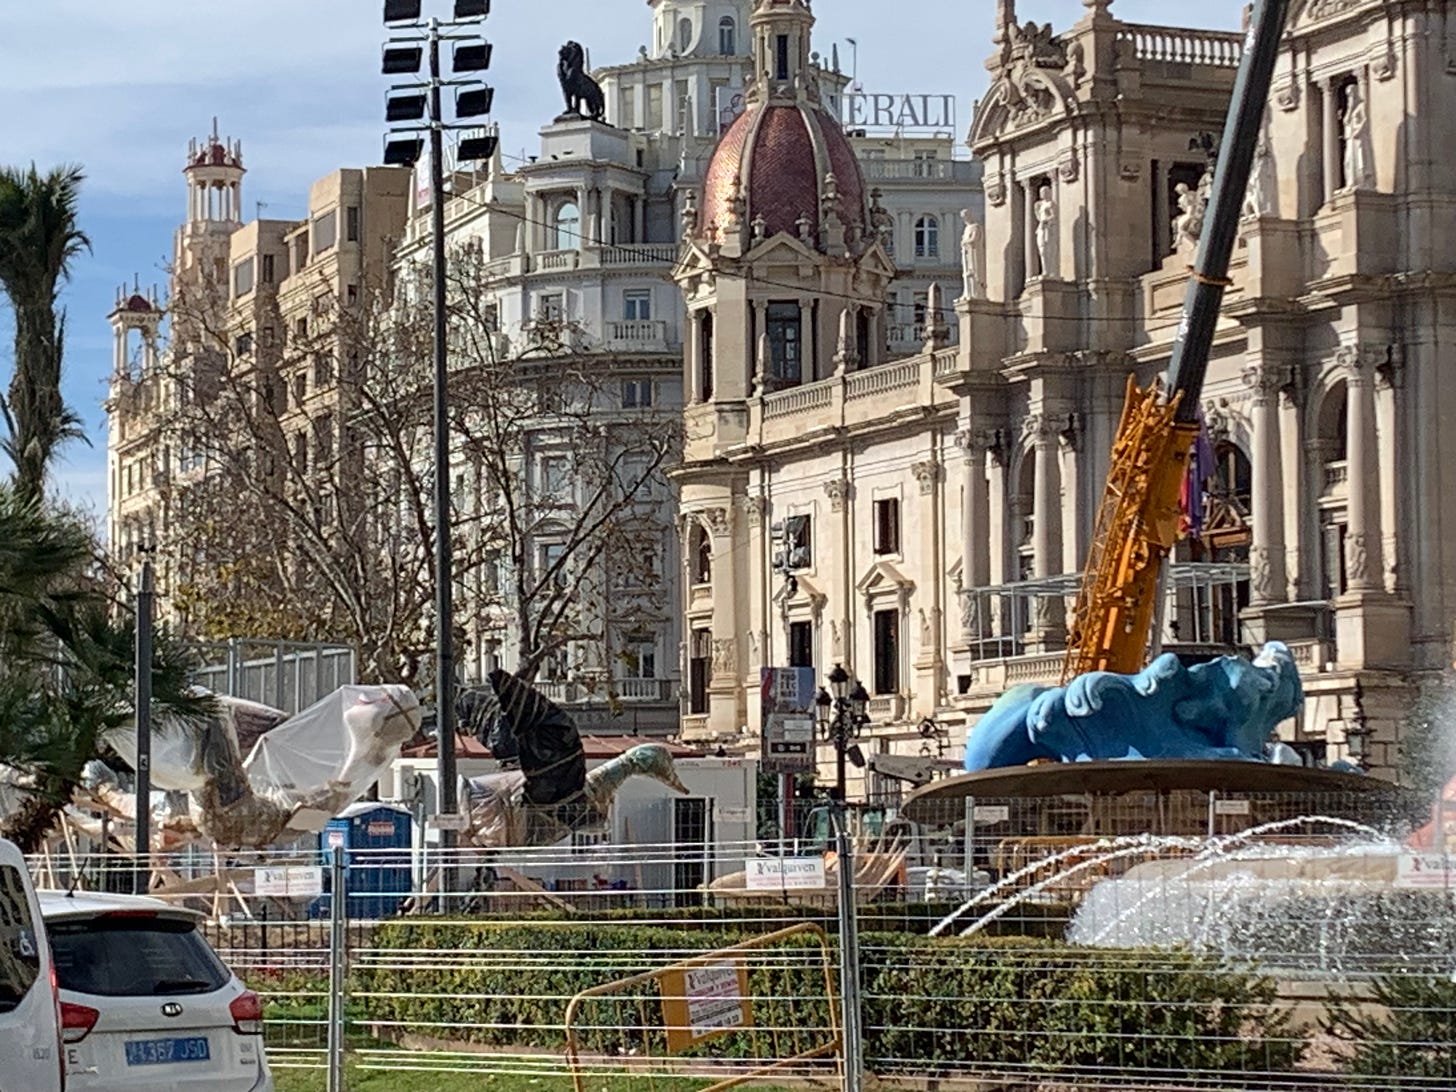 In the Plaça de l'Ajuntament, mysterious wrapped figures lay behind fencing